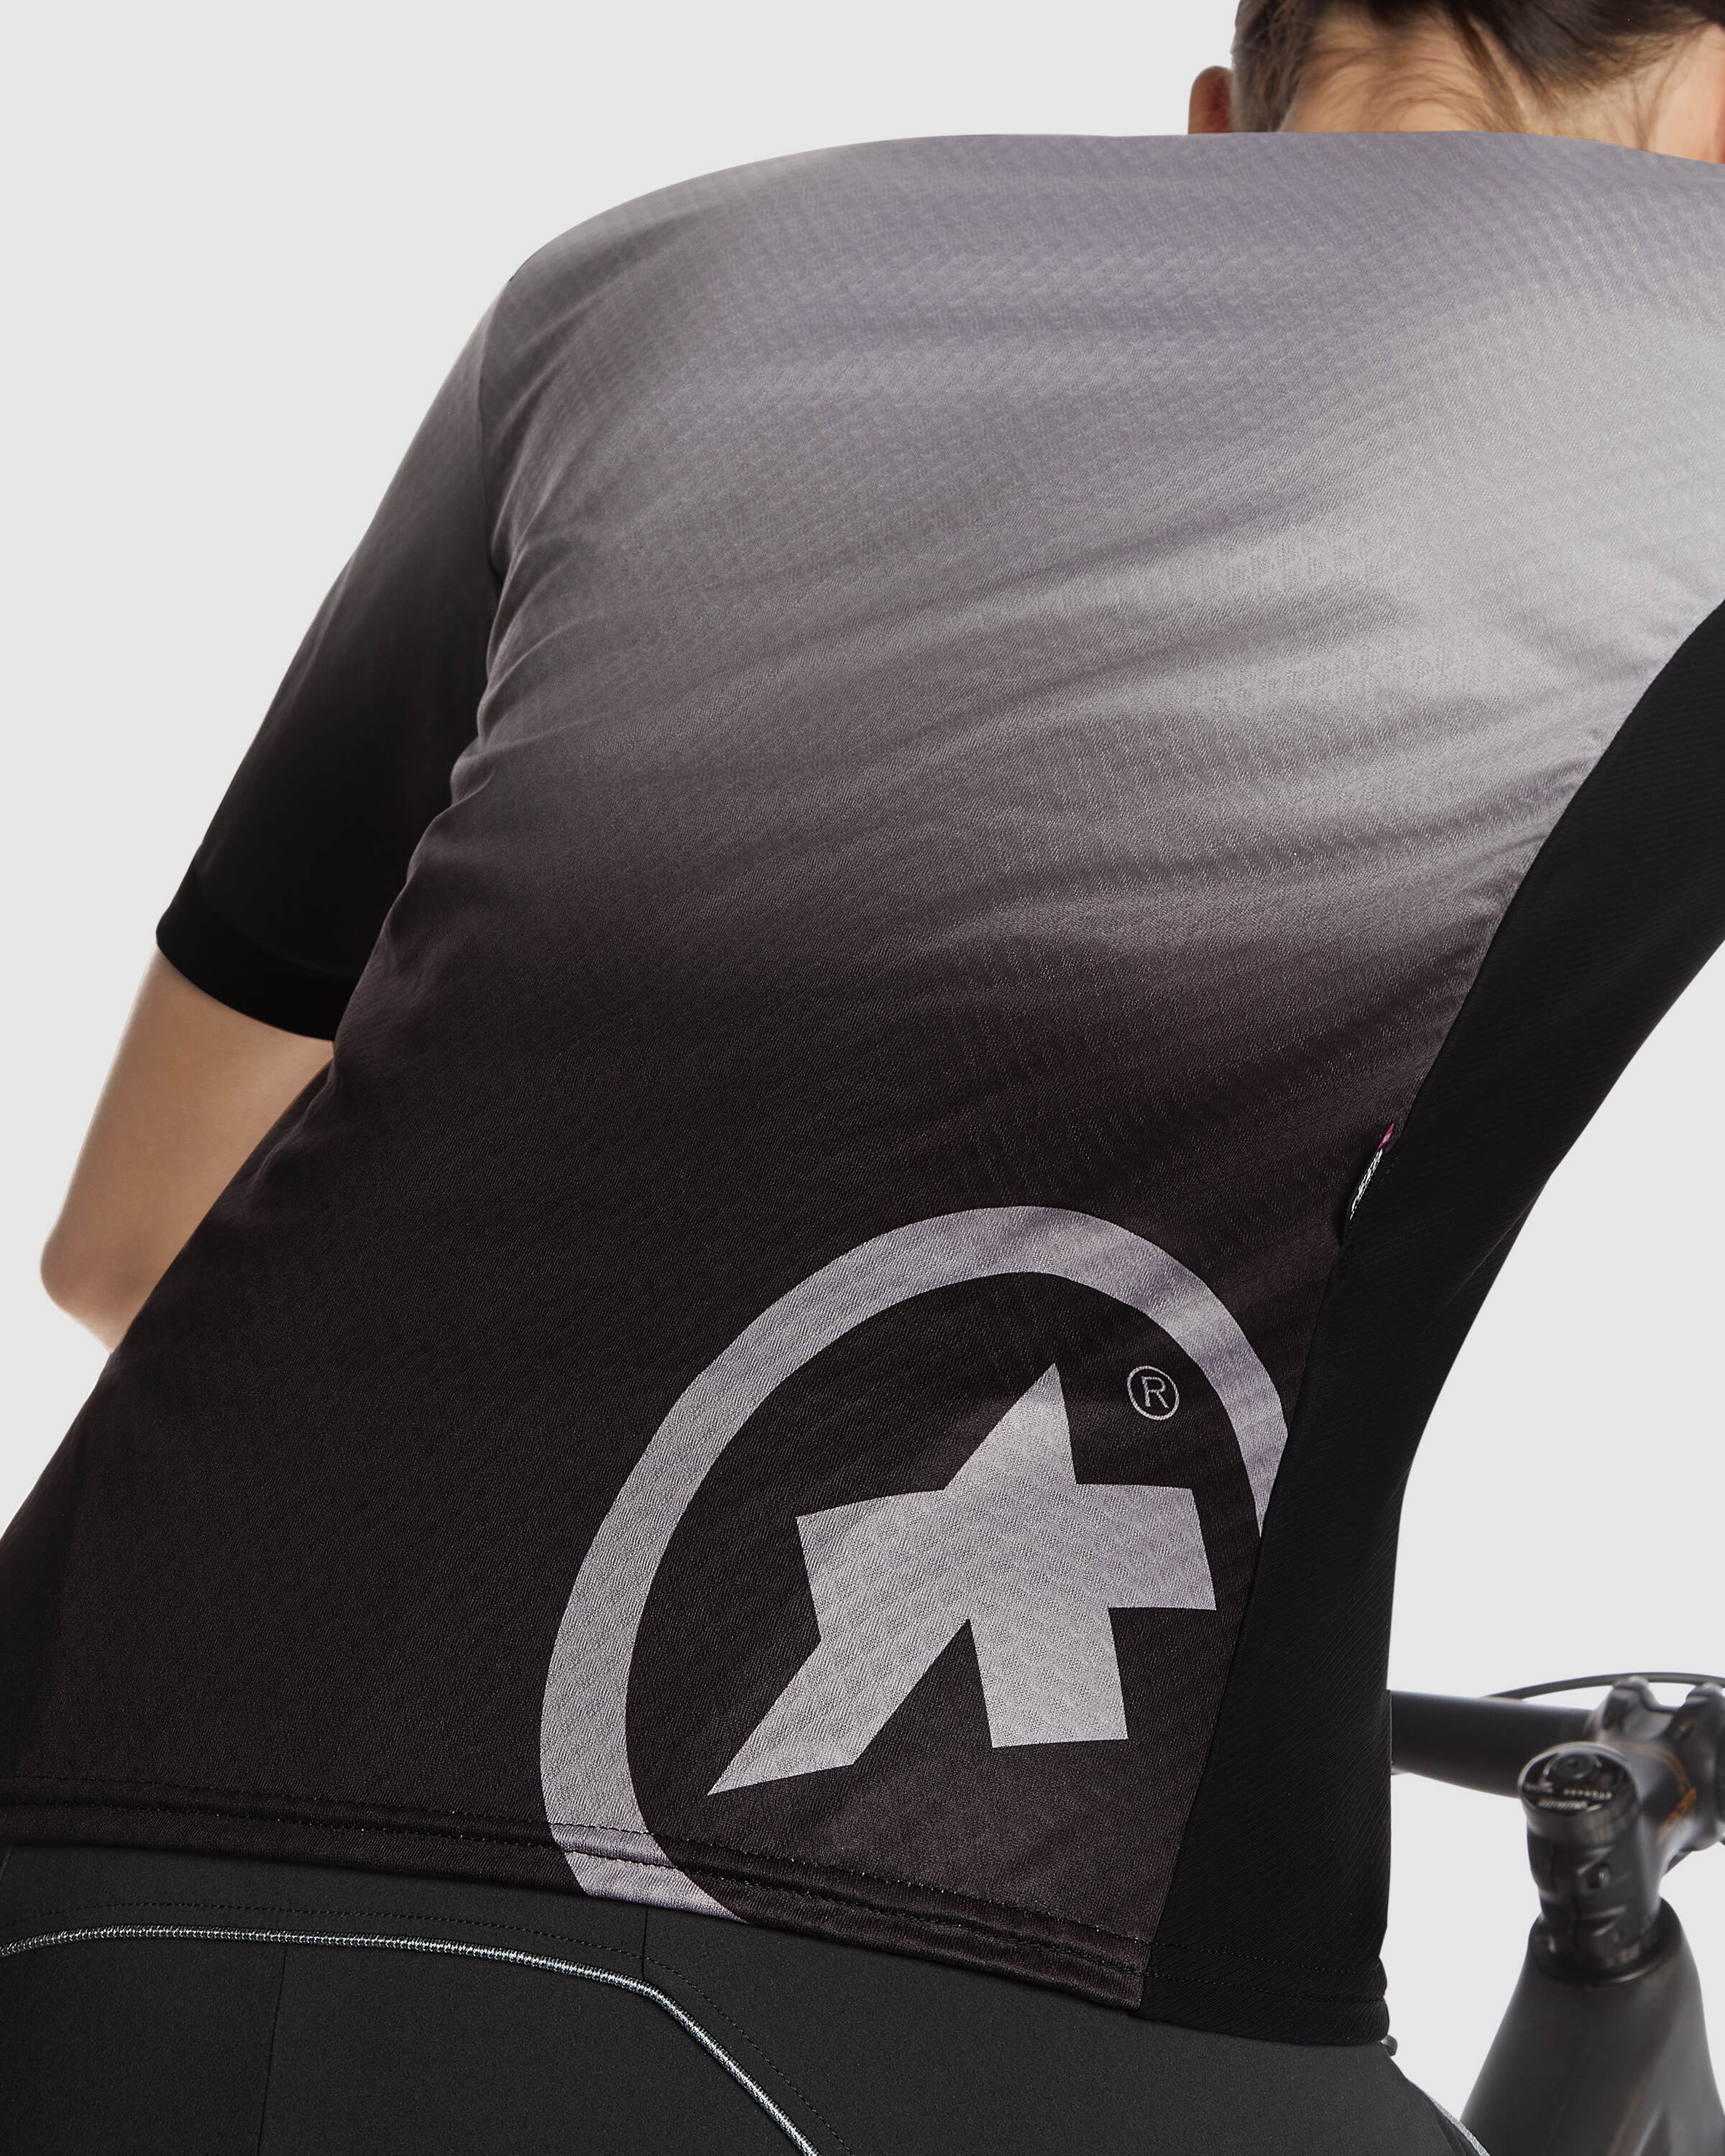 TRAIL Women's Jersey T3 - ASSOS Of Switzerland - Official Outlet